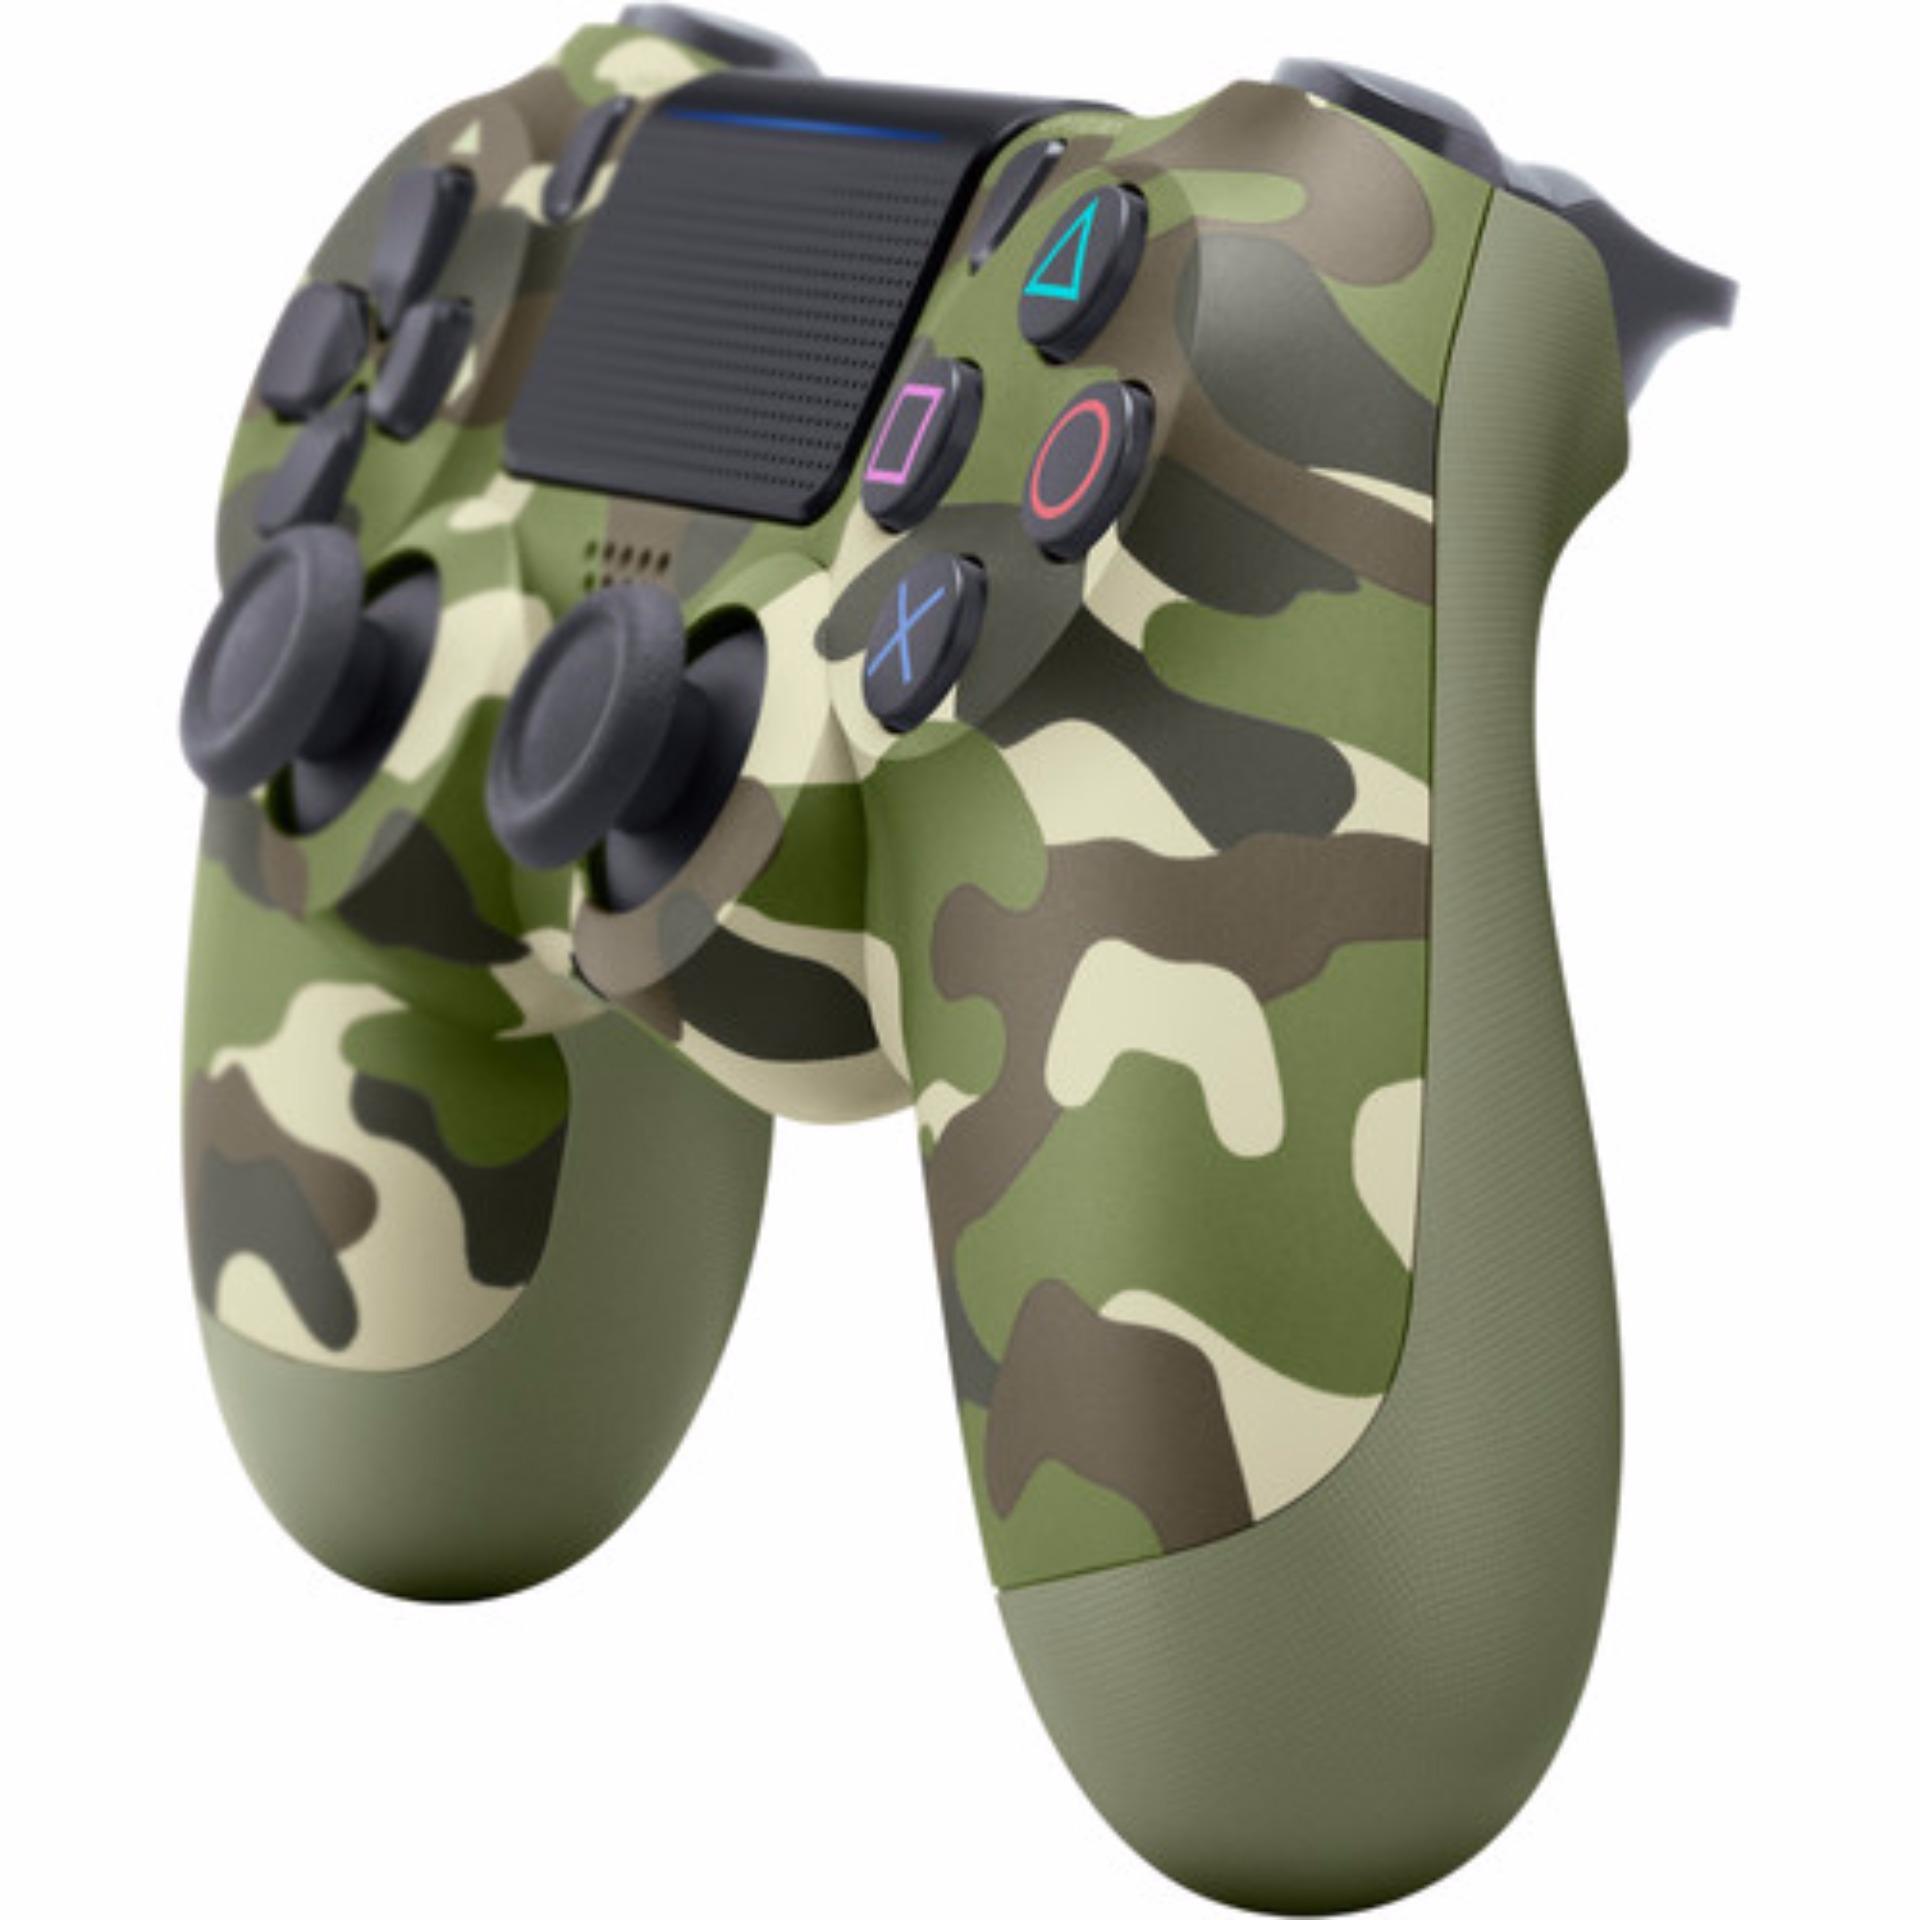 Sony Official New DualShock 4 CUH-ZCT2 Series Wireless Controller for PS4 - Green Camouflage